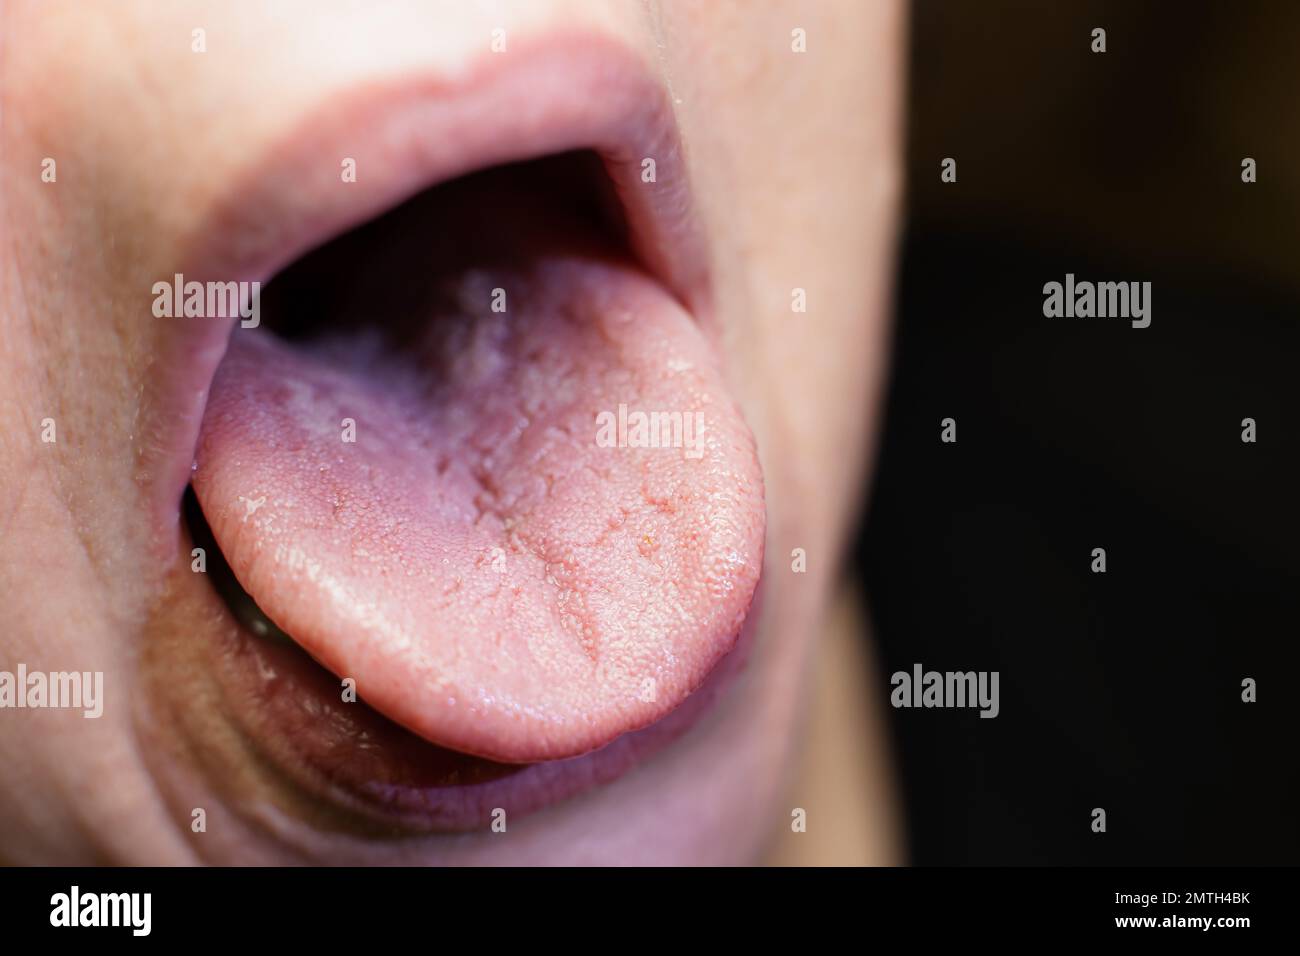 Male shows overgrowth candidiasis on his tongue - Shallow focus Stock Photo